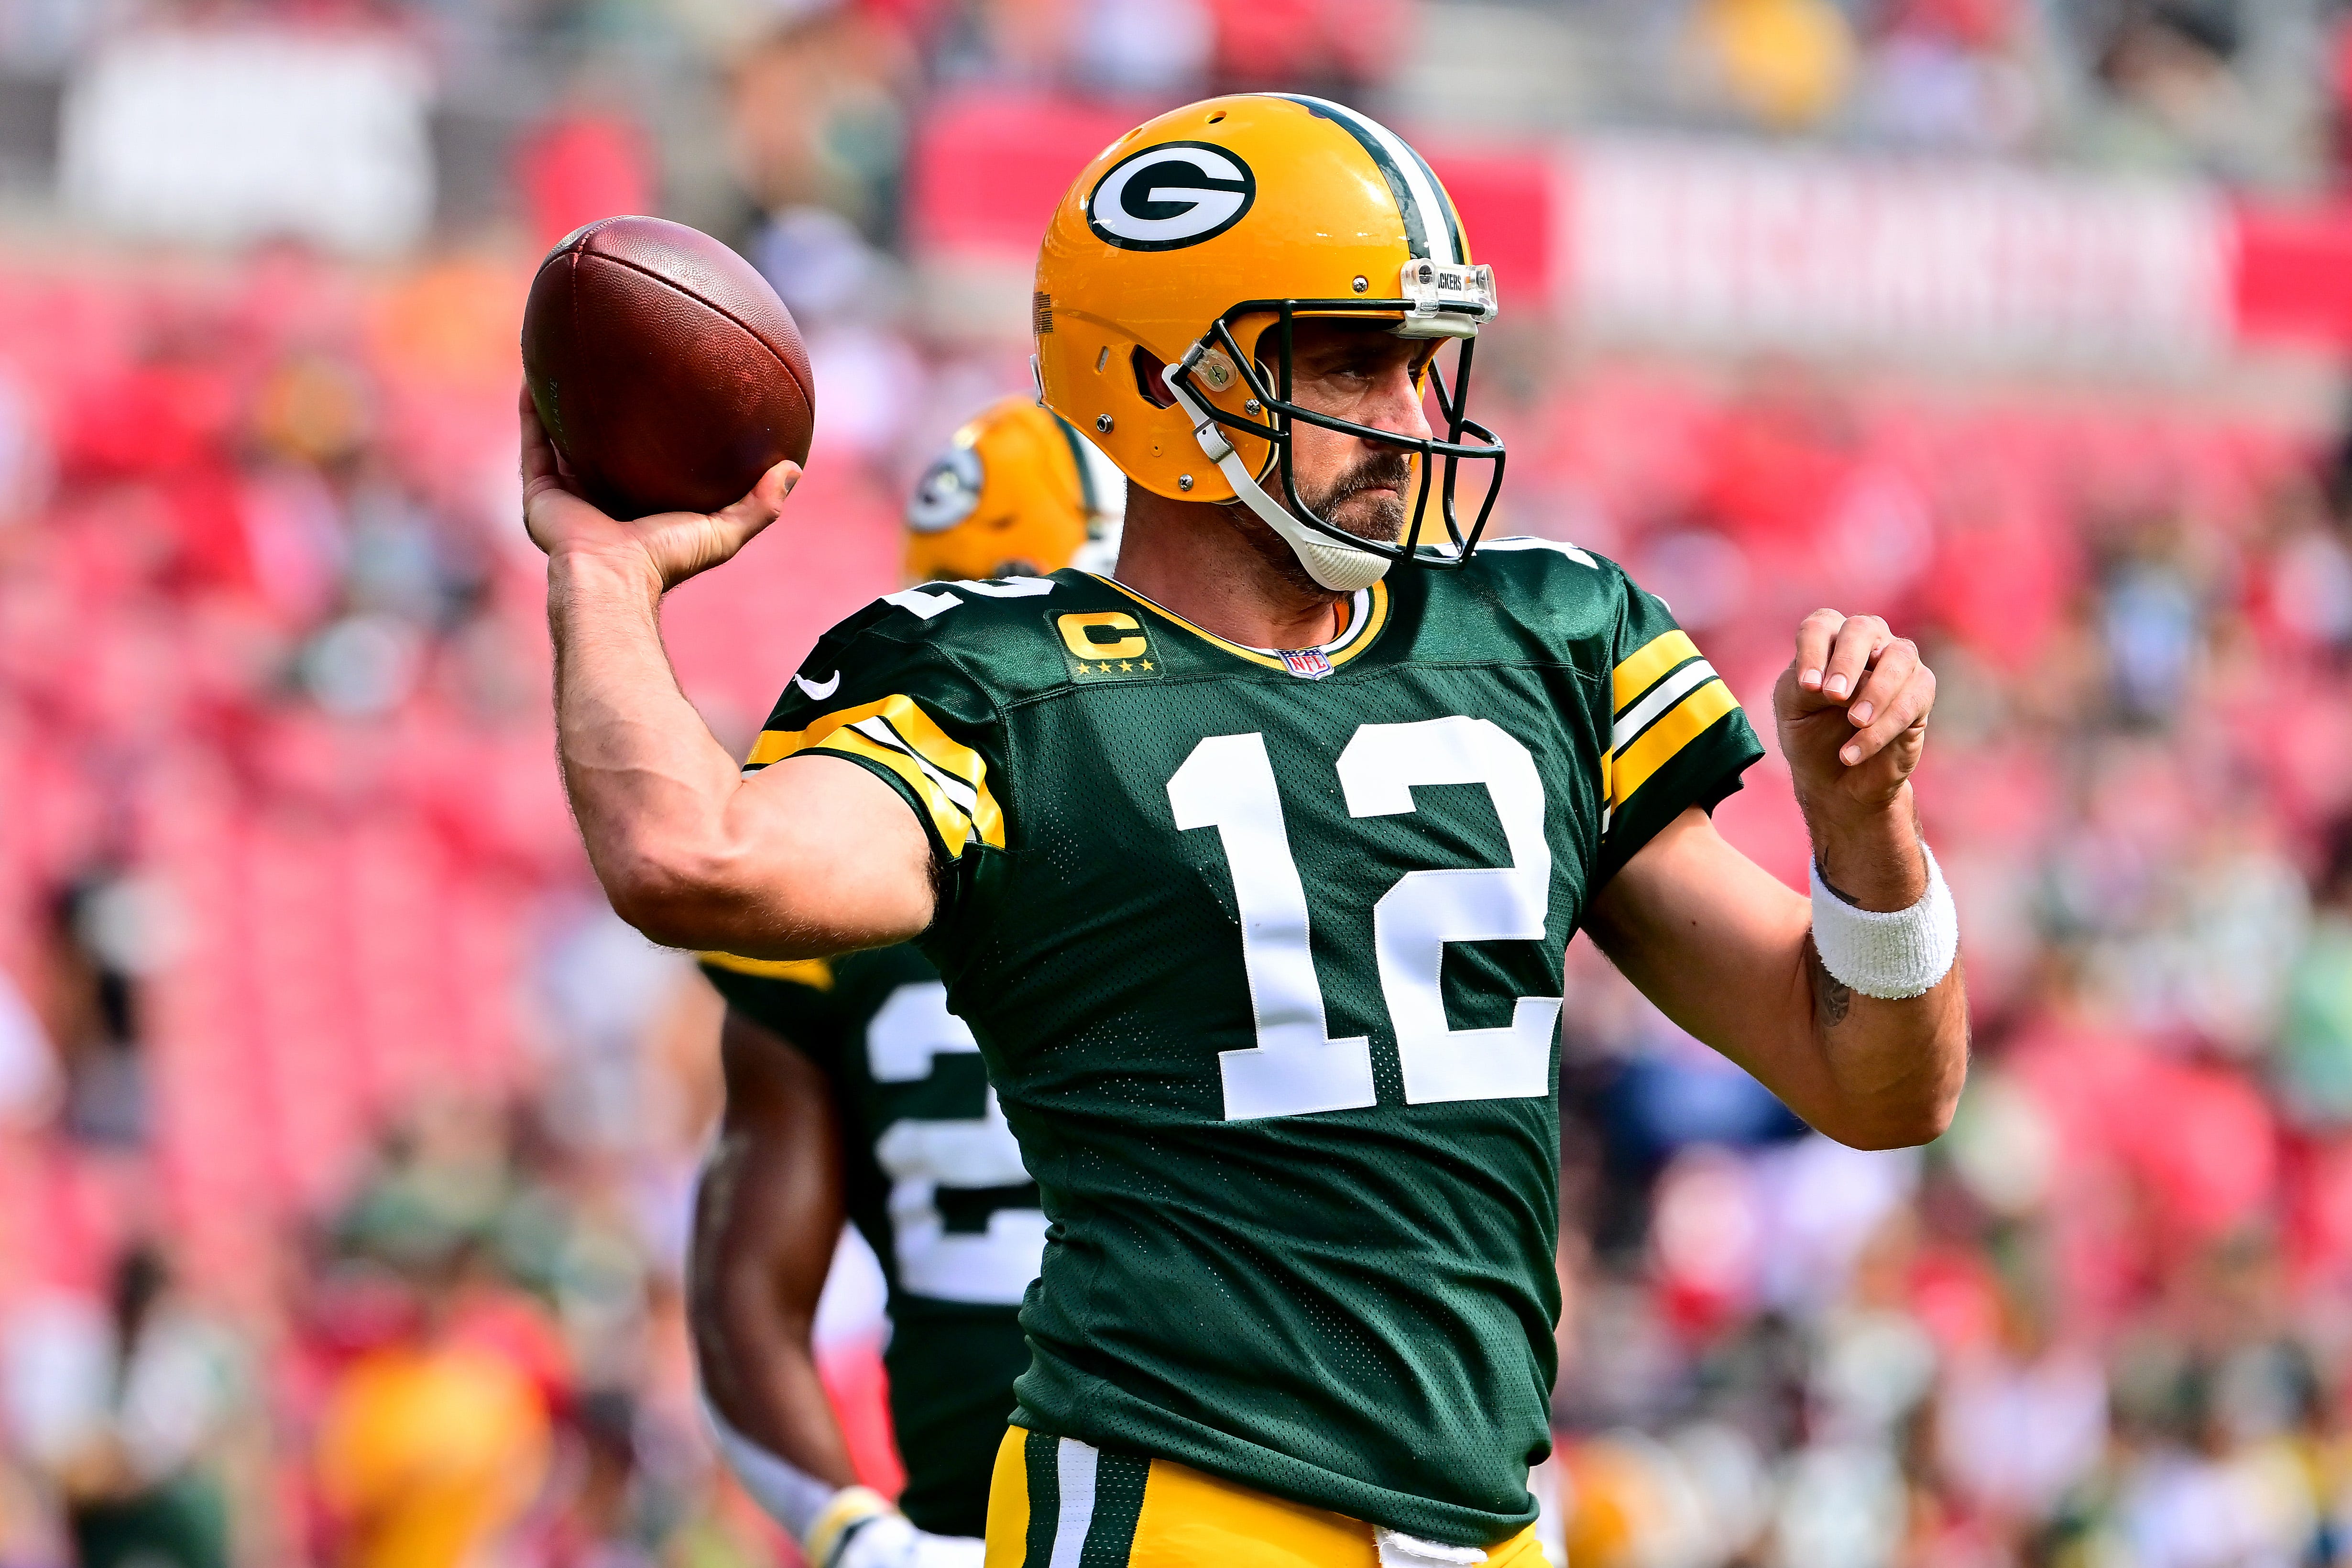 Packers quarterback Aaron Rodgers warms up prior to the game against the Tampa Bay Buccaneers on Sept. 25, 2022, at Raymond James Stadium in Tampa, Florida.